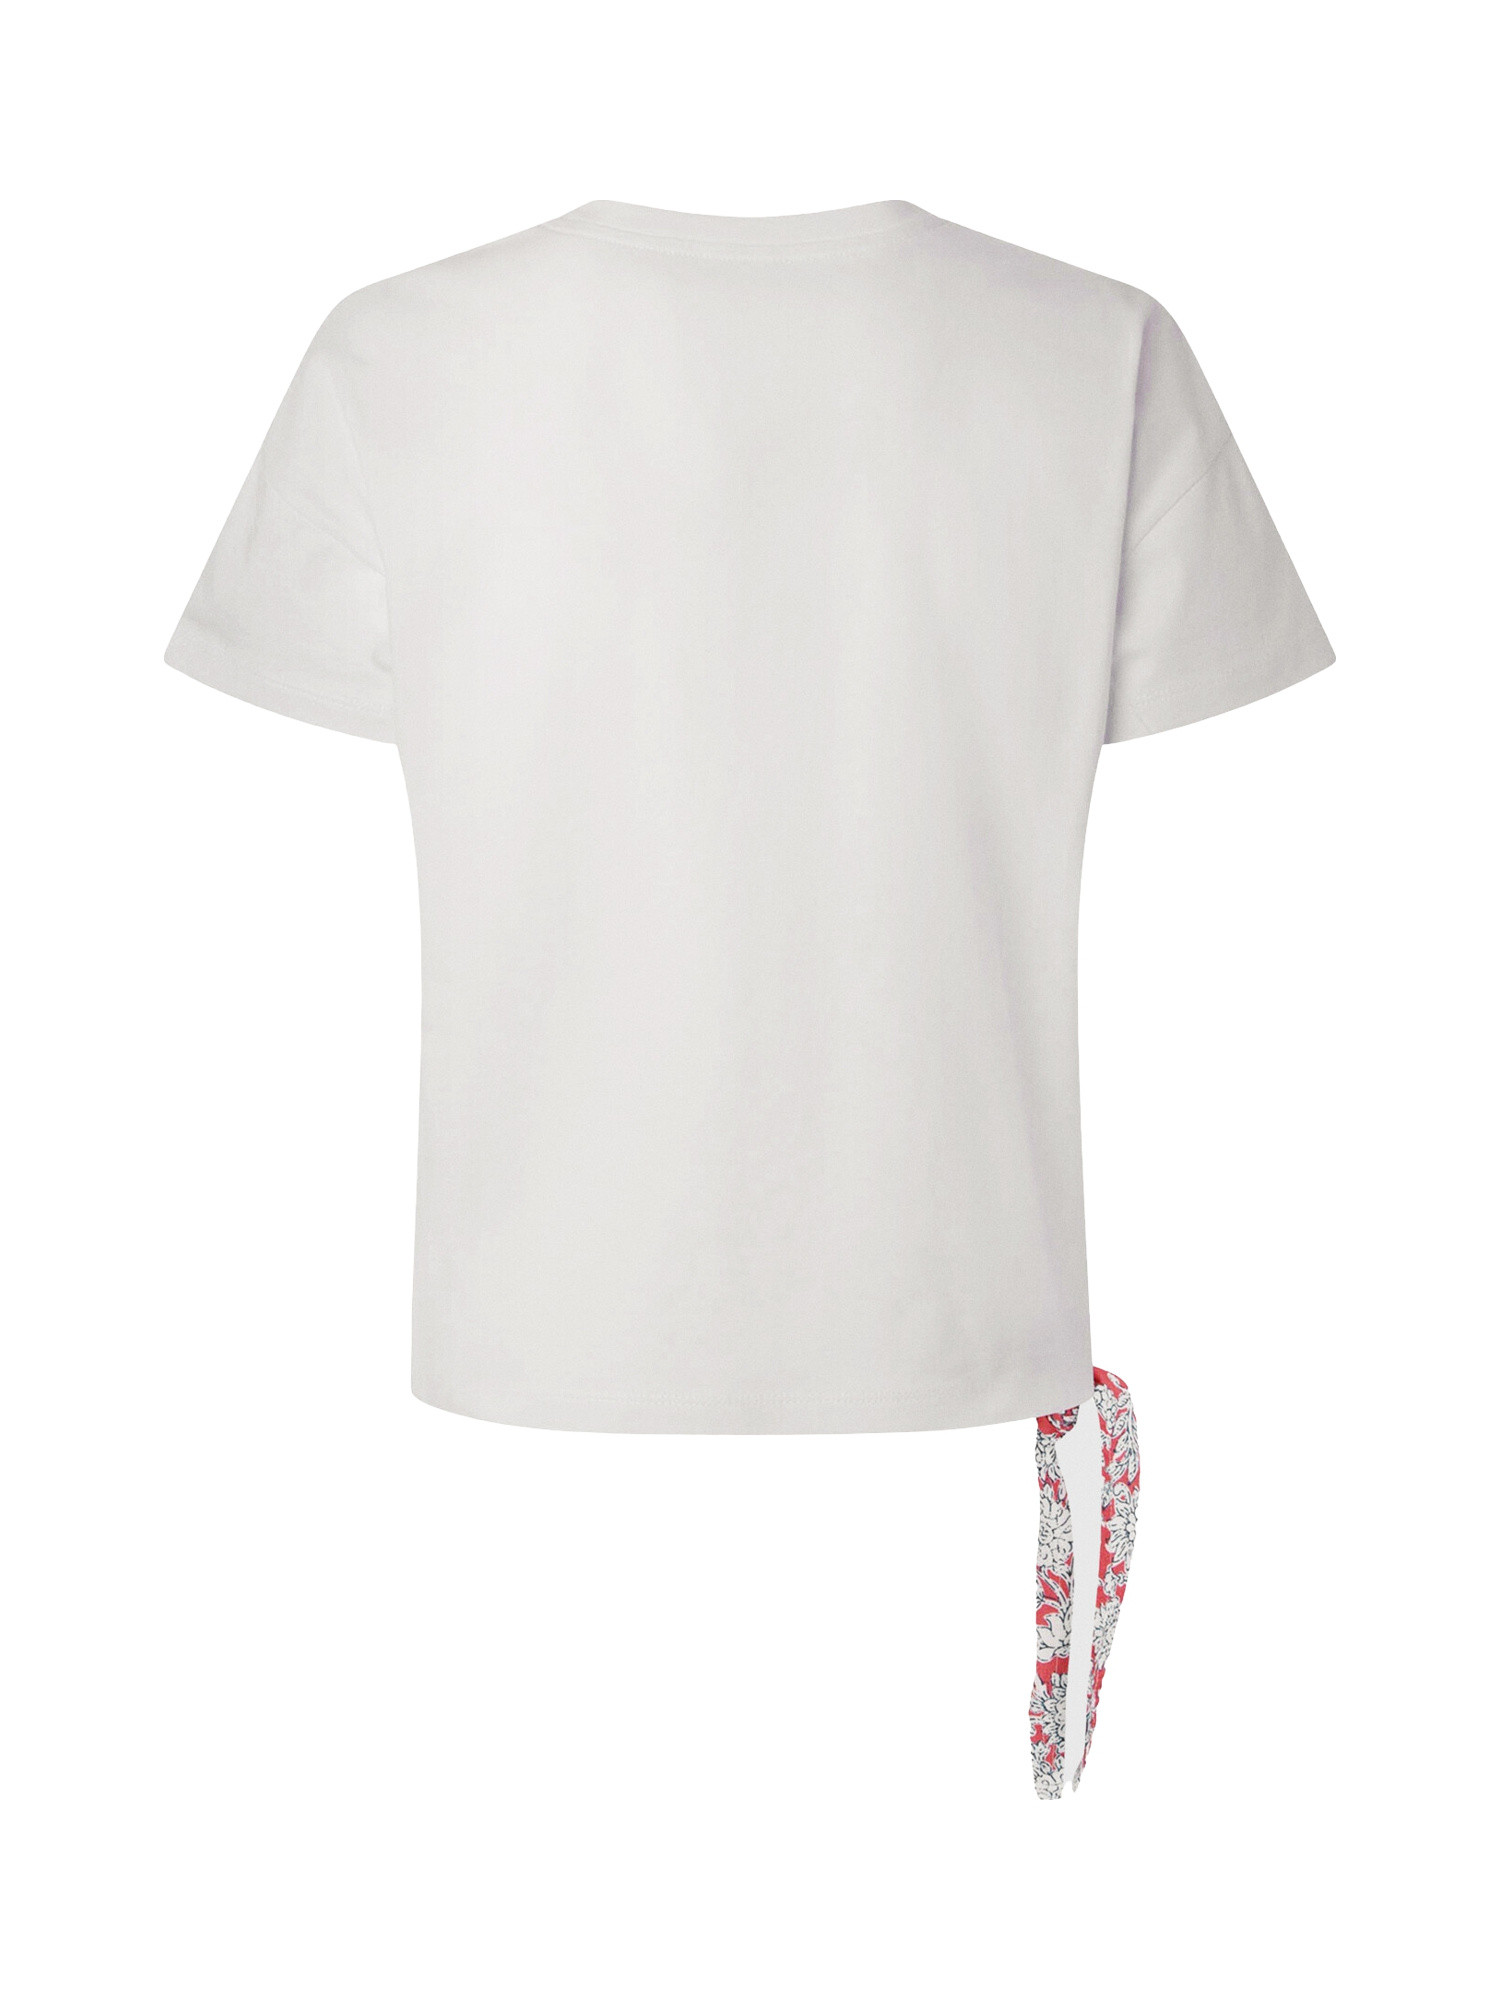 Pepe Jeans - T-shirt a fantasia in cotone, Rosso, large image number 1